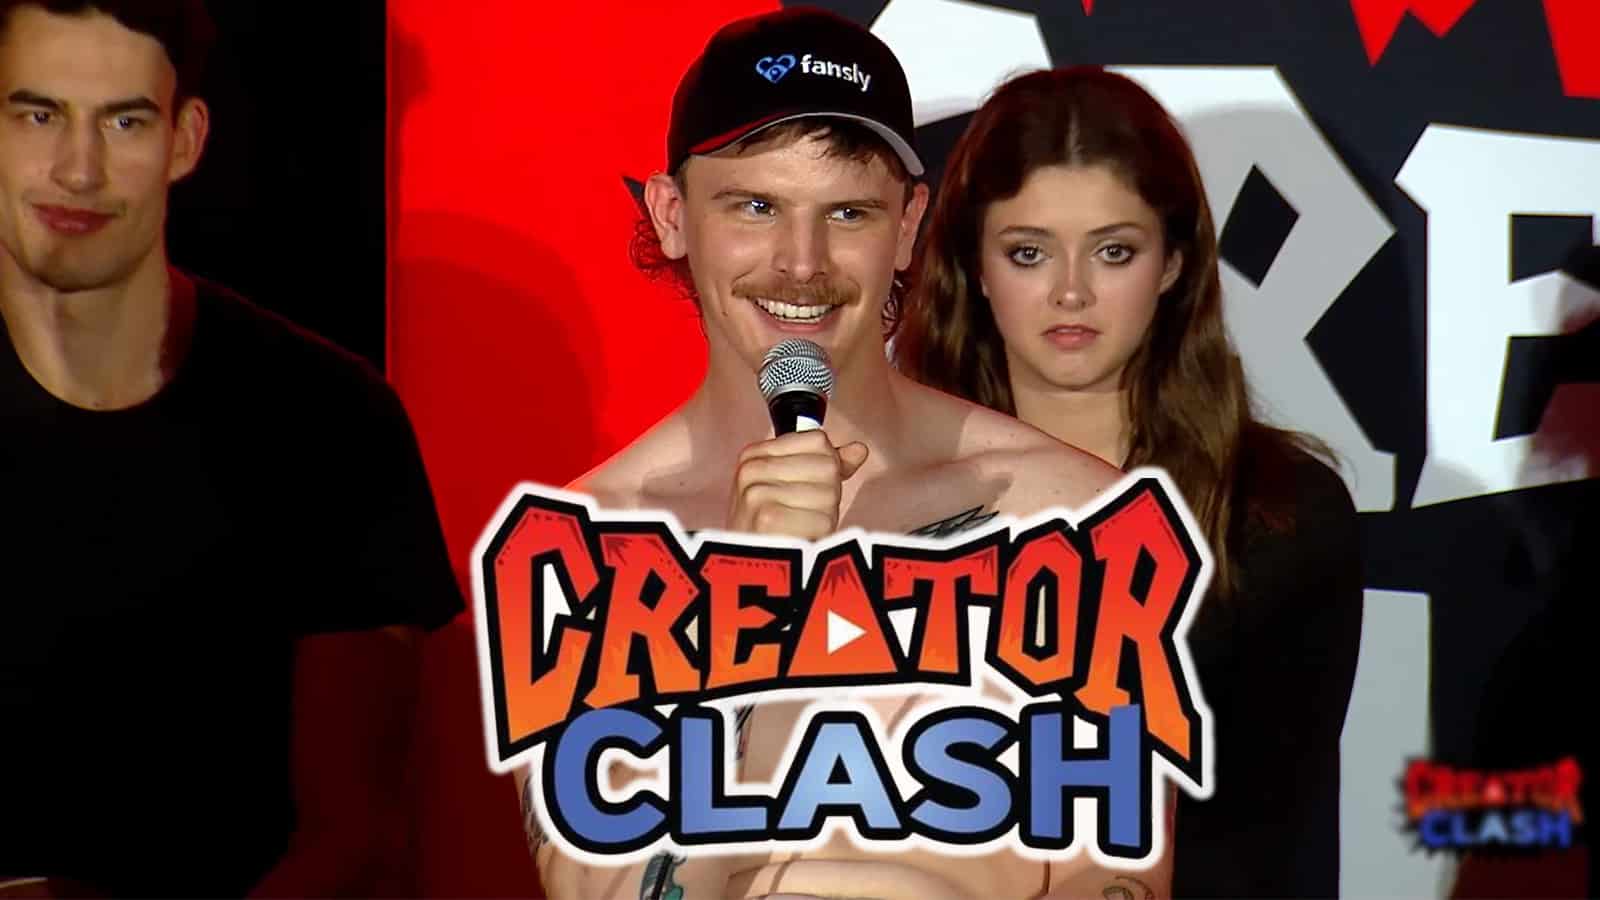 sorry I just thought this was funny 🤷‍♀️ #justaminx #creatorclash #fo